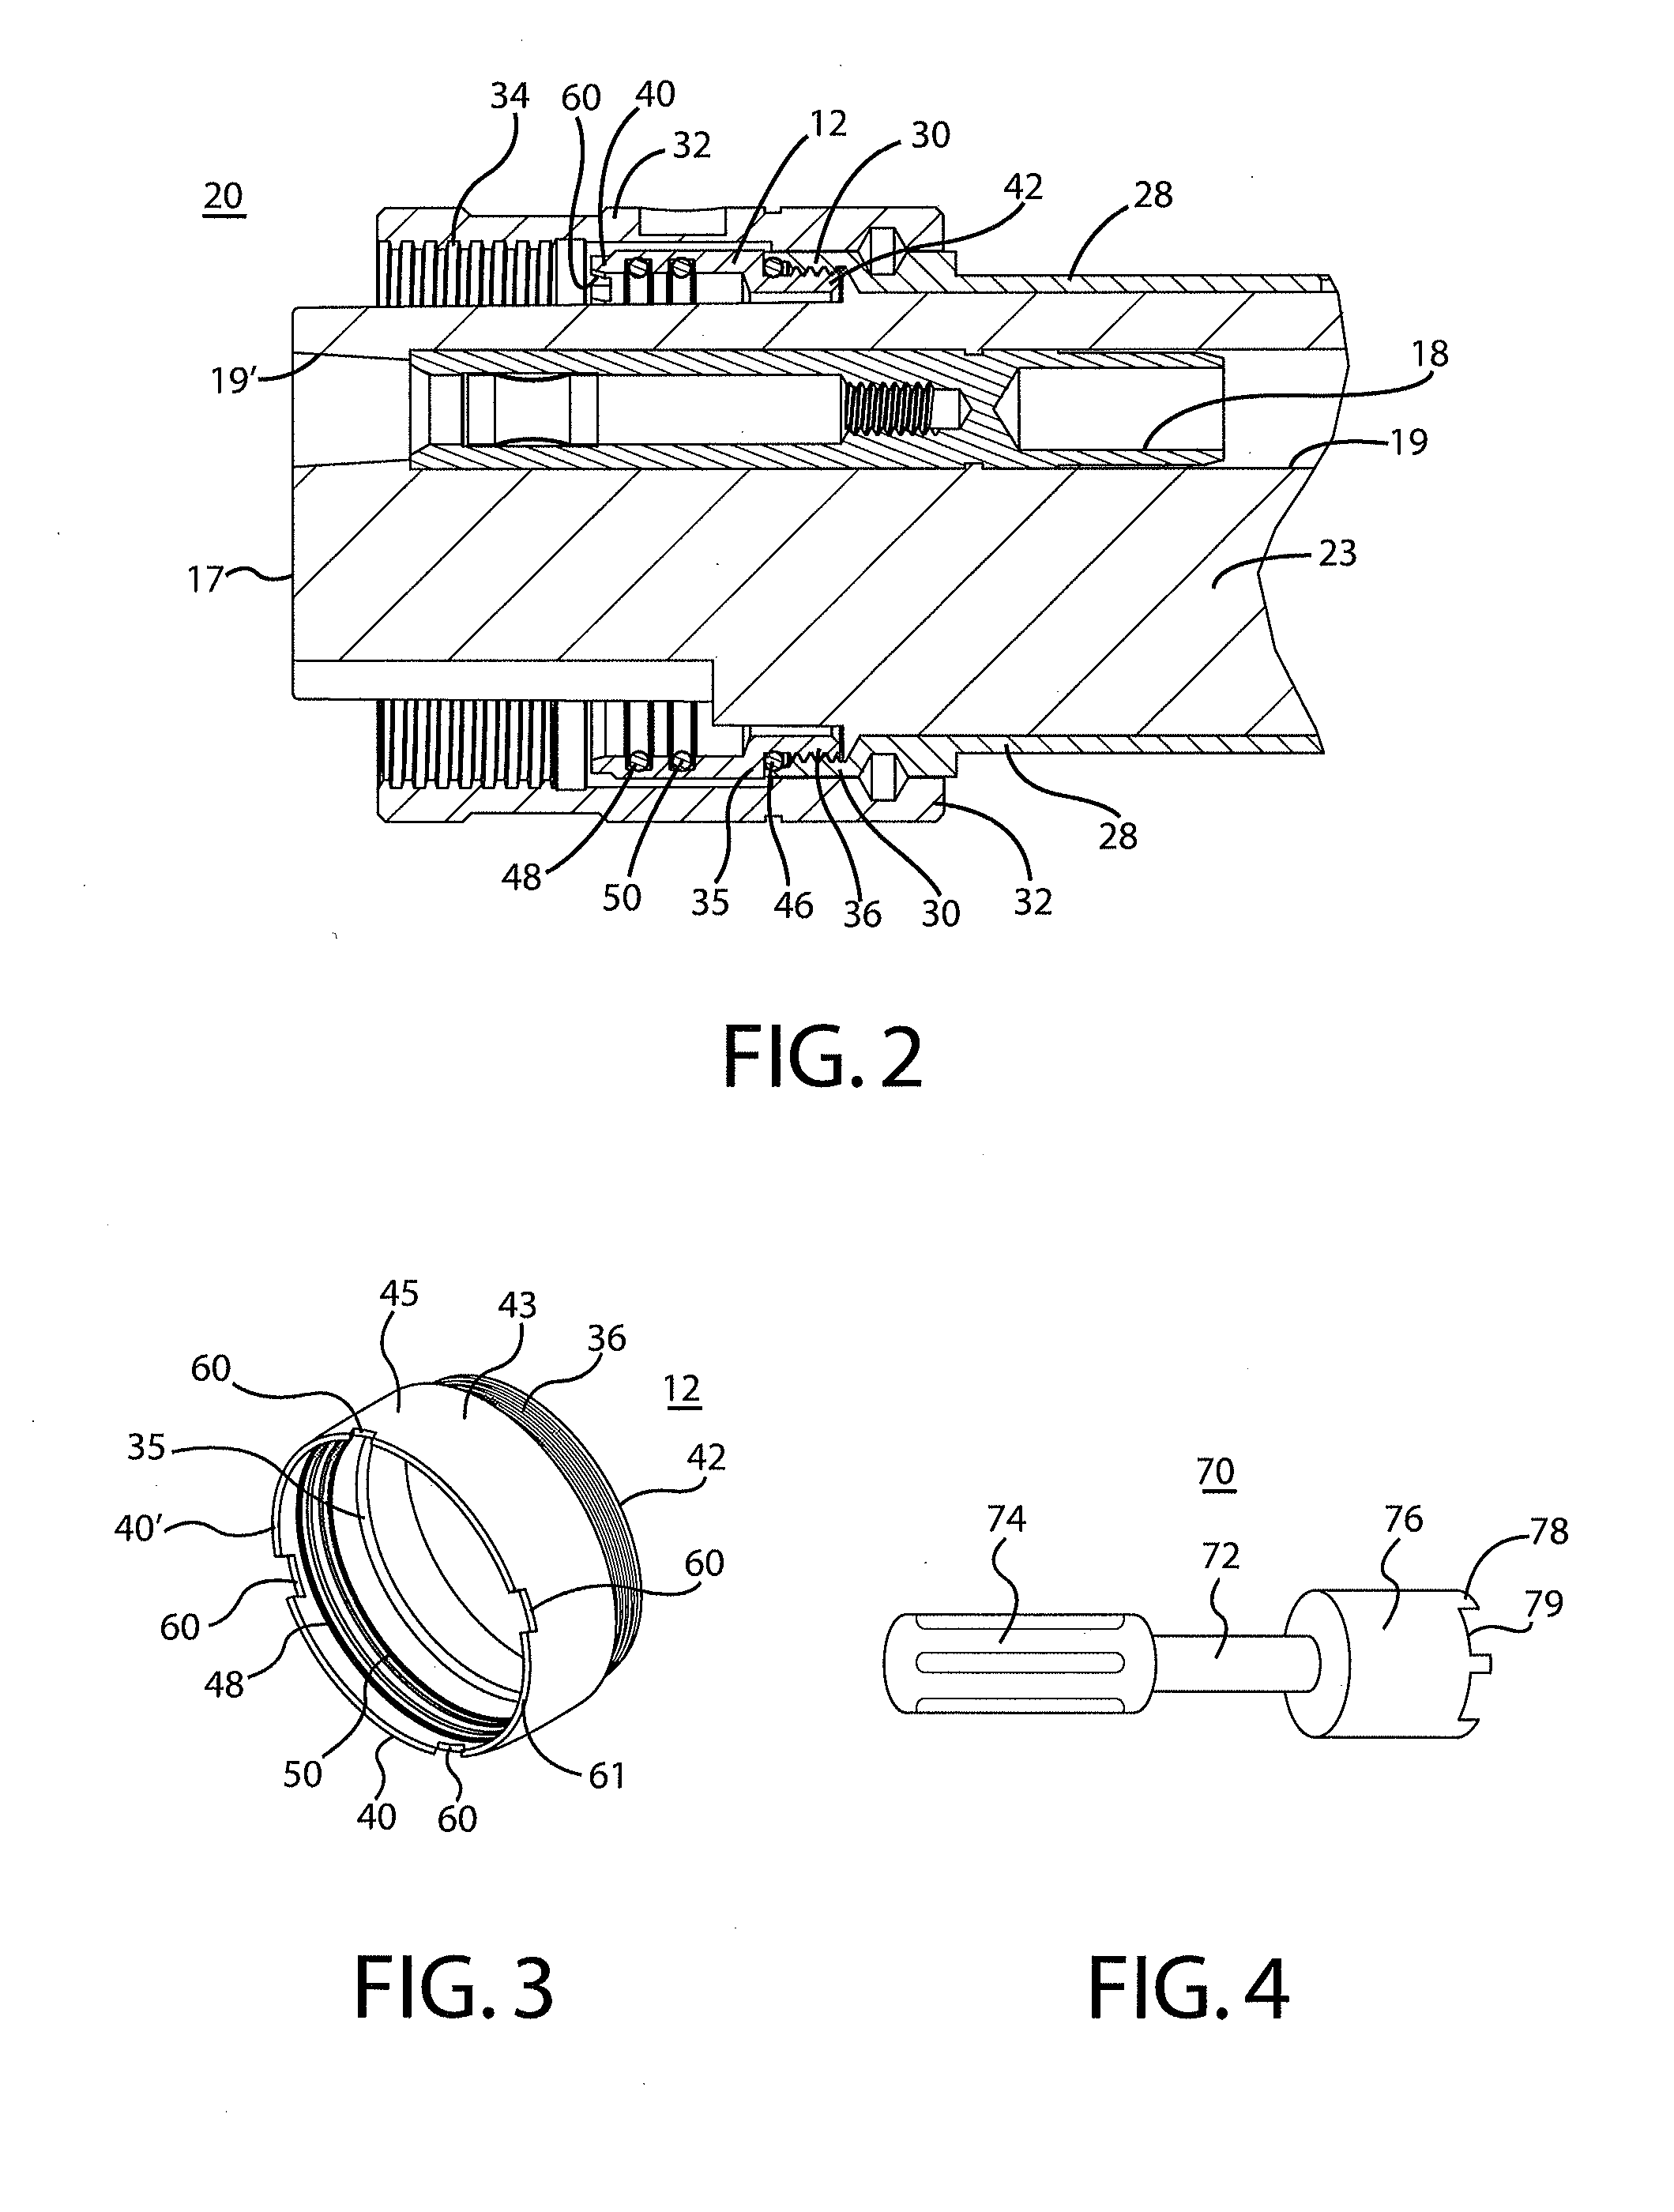 Electrical connector system with replaceable sealing element